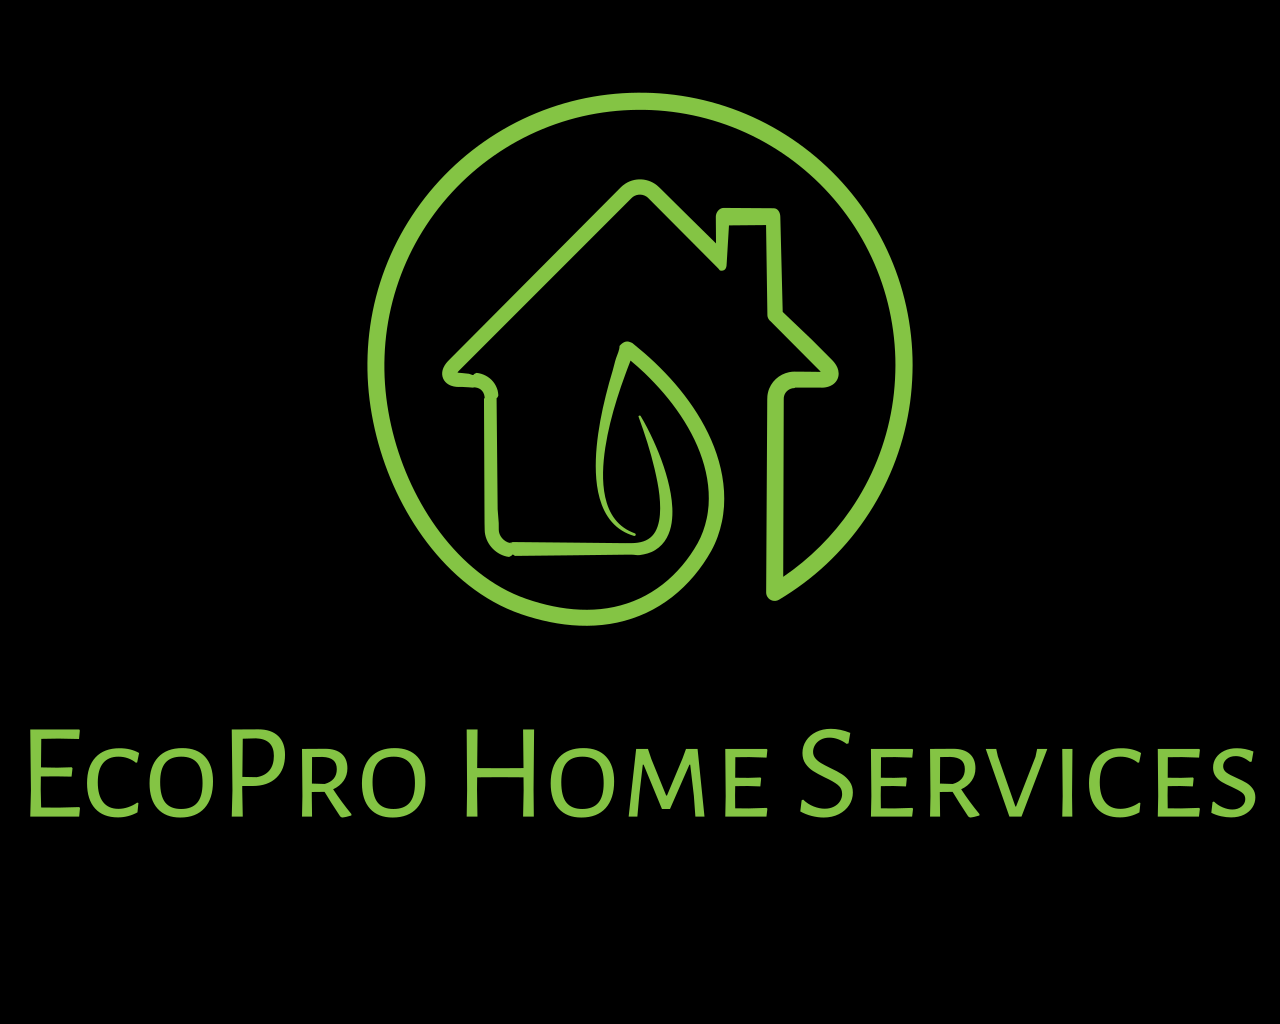 EcoPro Home Services 's logo